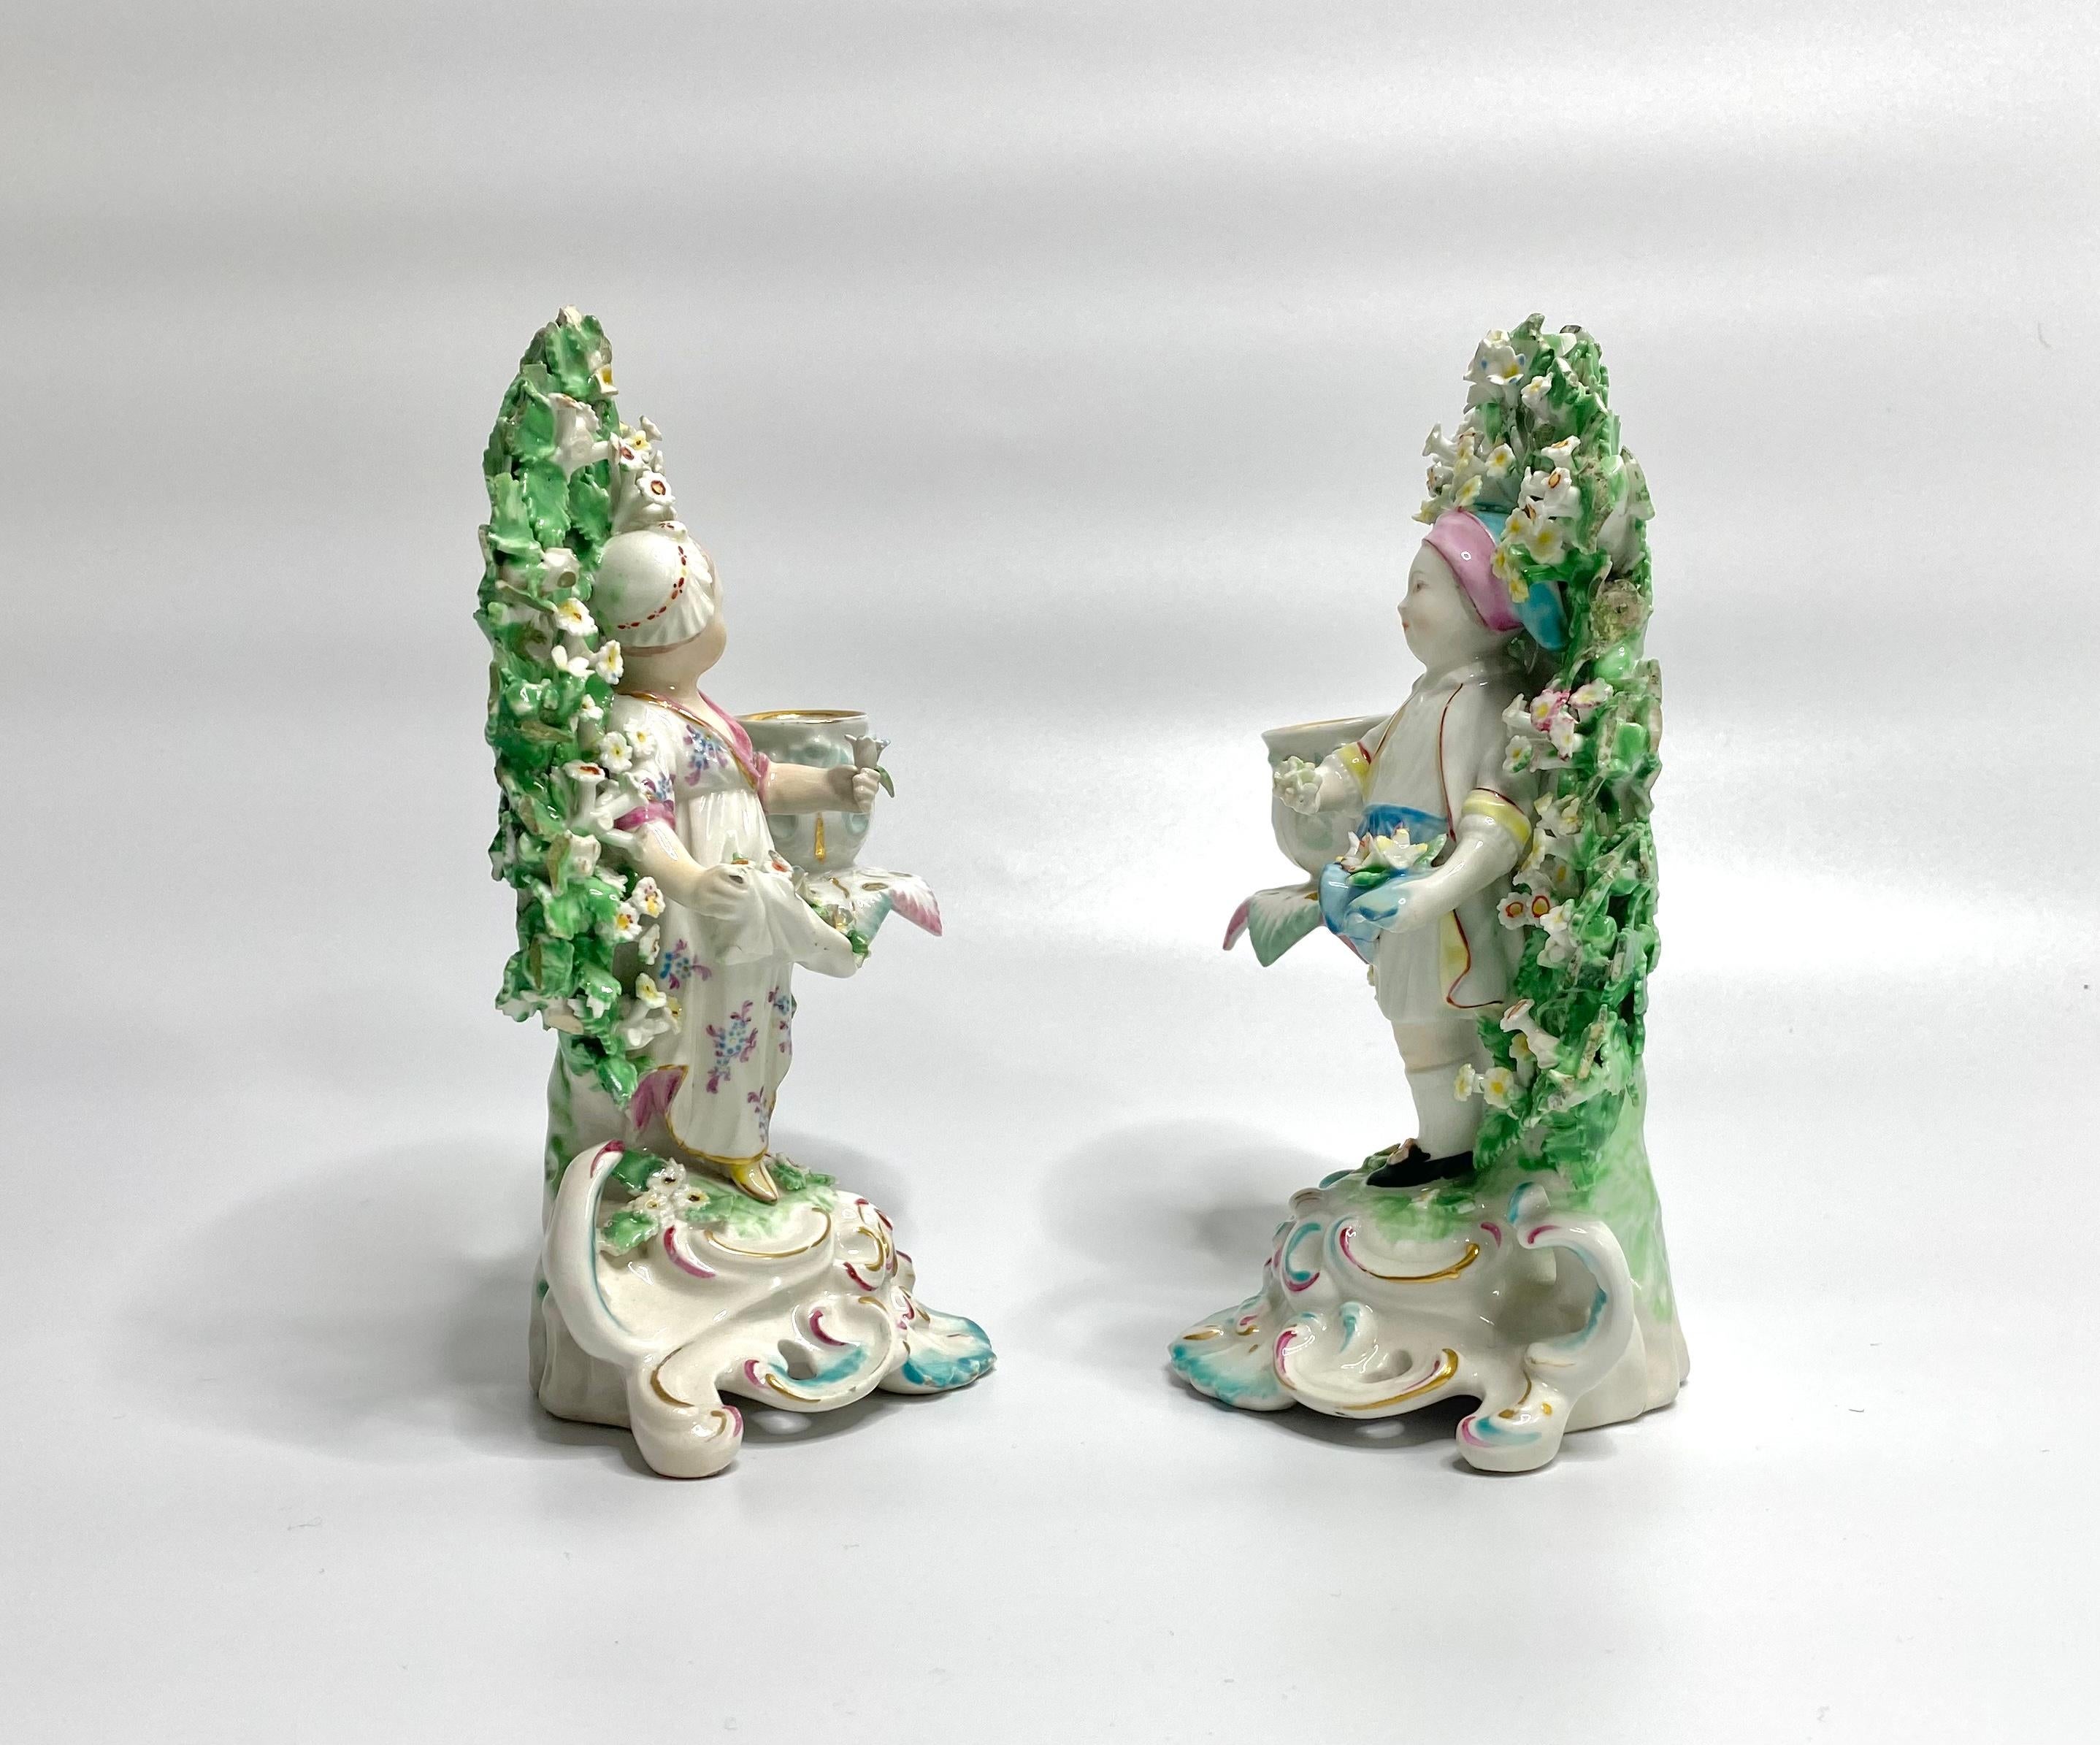 Pair of Derby porcelain bocage candlesticks, c. 1765. Modelled as a boy and girl gathering flowers in their aprons, before elaborate bocage. Each figure with a candle sconce issuing from the bocage.
Set upon elaborate rococo scroll bases, edged in